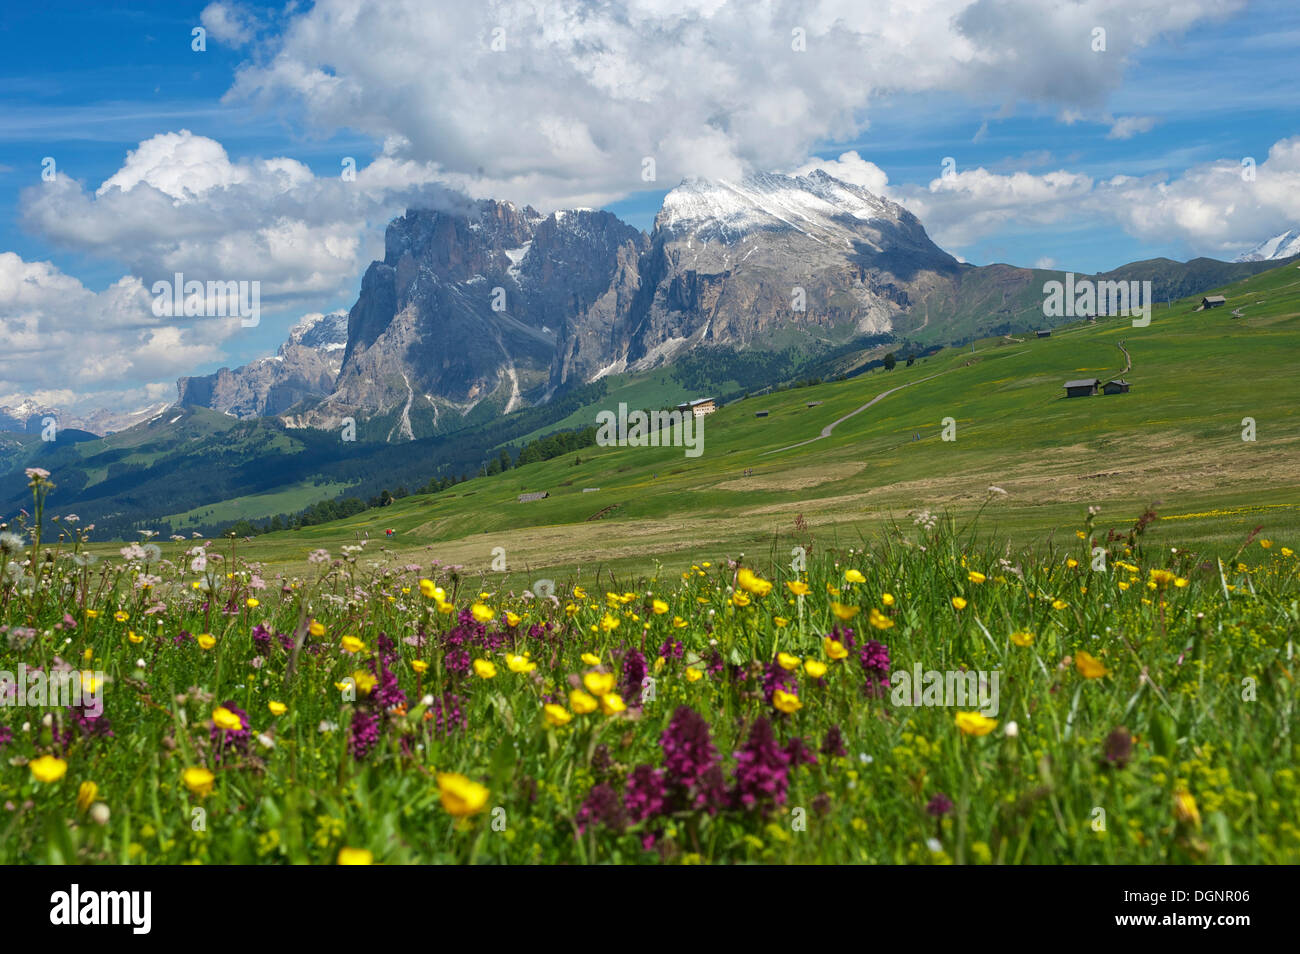 Seiser Alm alpine pastures in front of Piatto Mountain and Sasso Lungo Mountains, Dolomiten, South Tyrol province Stock Photo